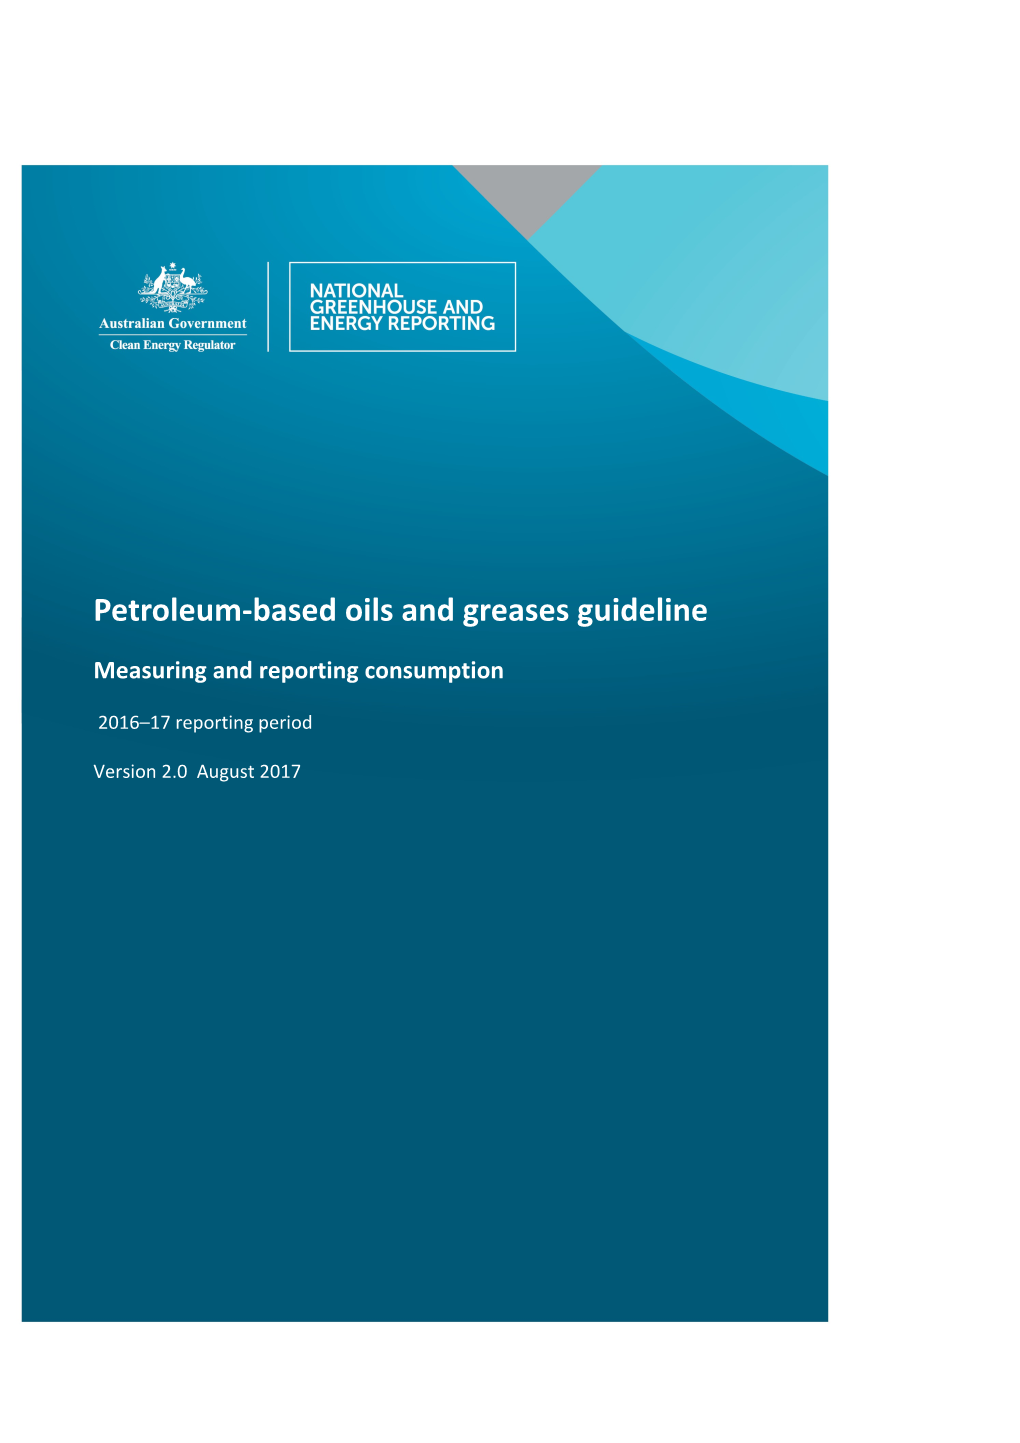 Petroleum-Based Oils and Greases Guideline